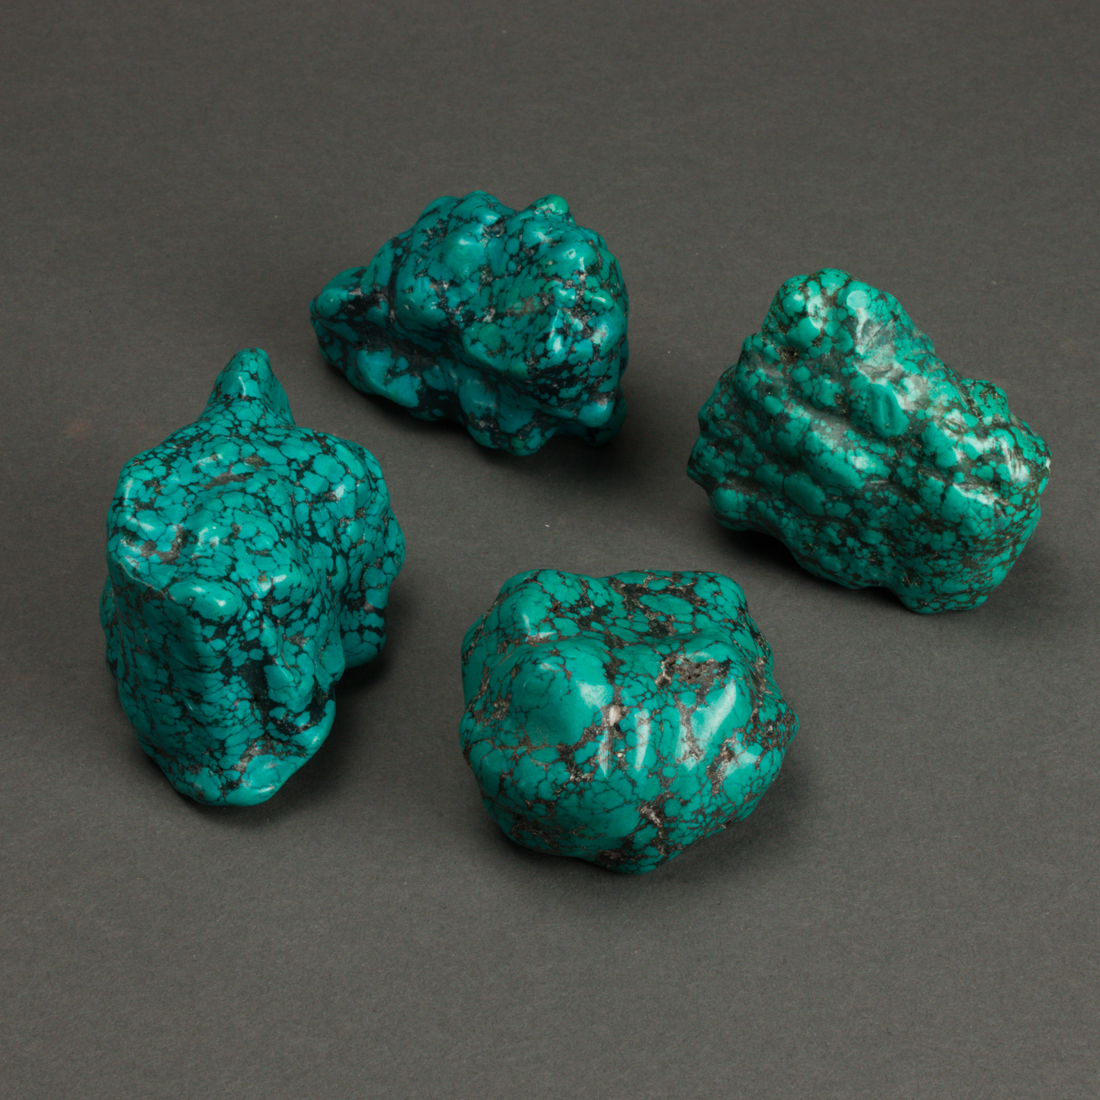 GROUP OF TURQUOISE SPECIMENS Group of